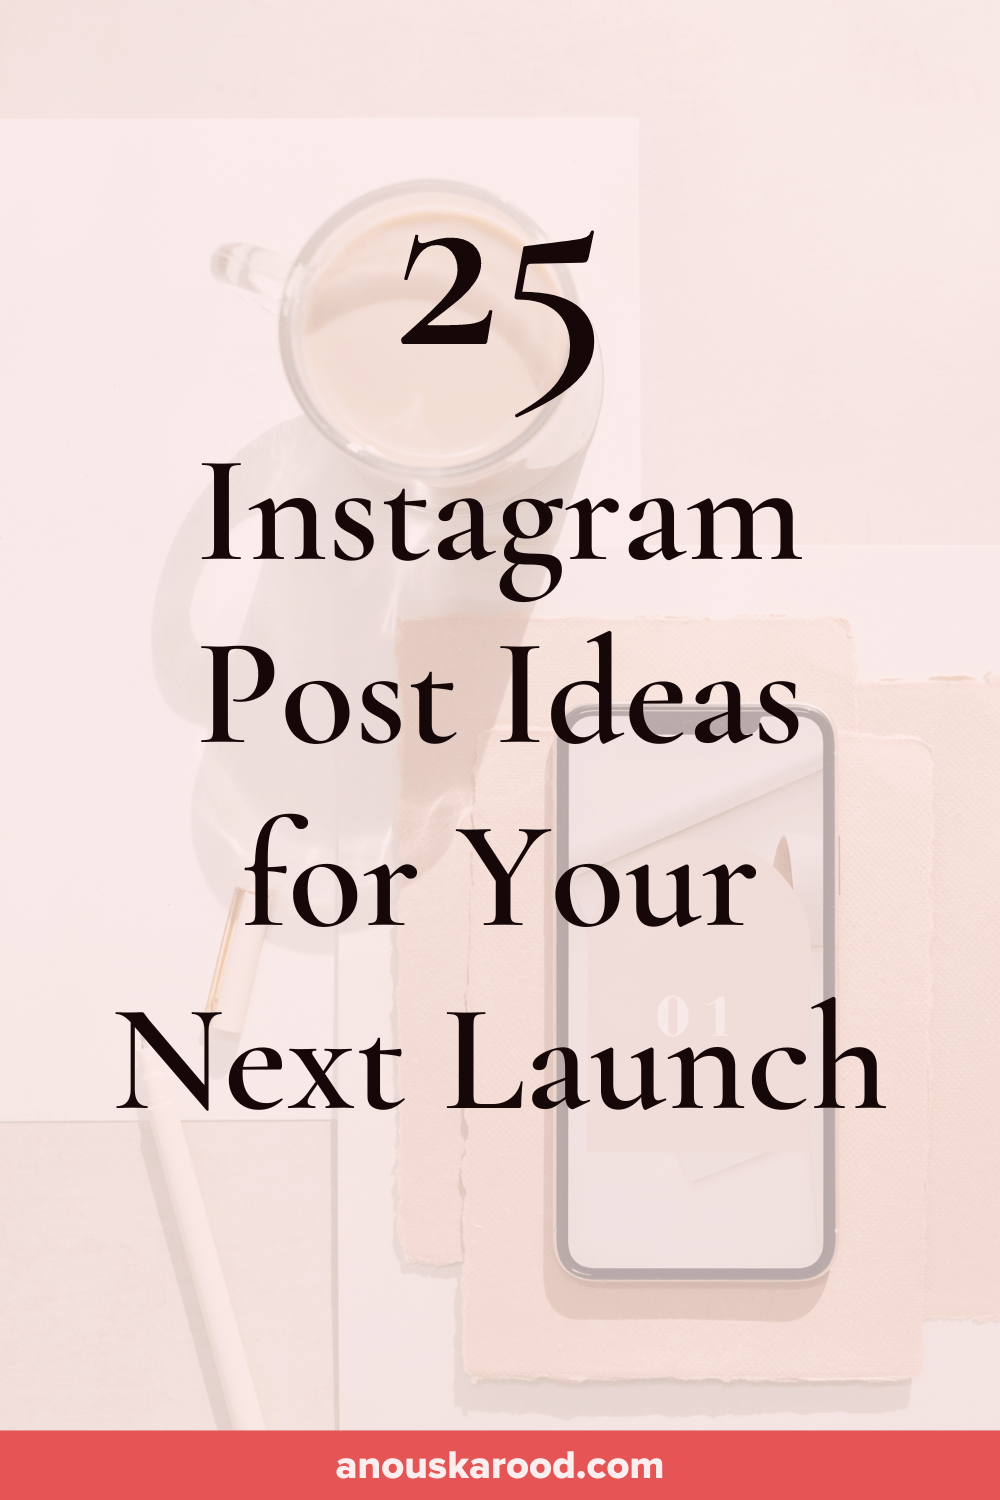 25 Instagram Post Ideas for Your Next Launch